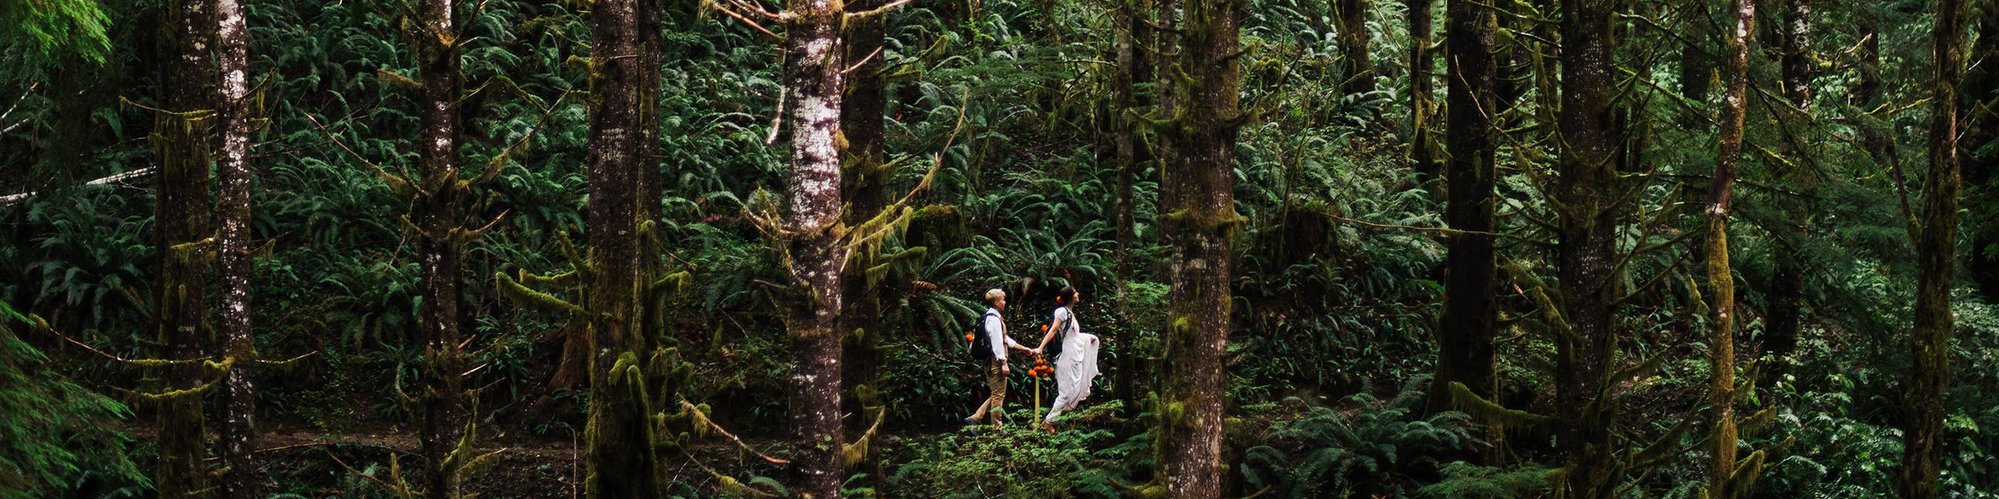 An eloping couple hikes through a deep green forest, the trees towering above them